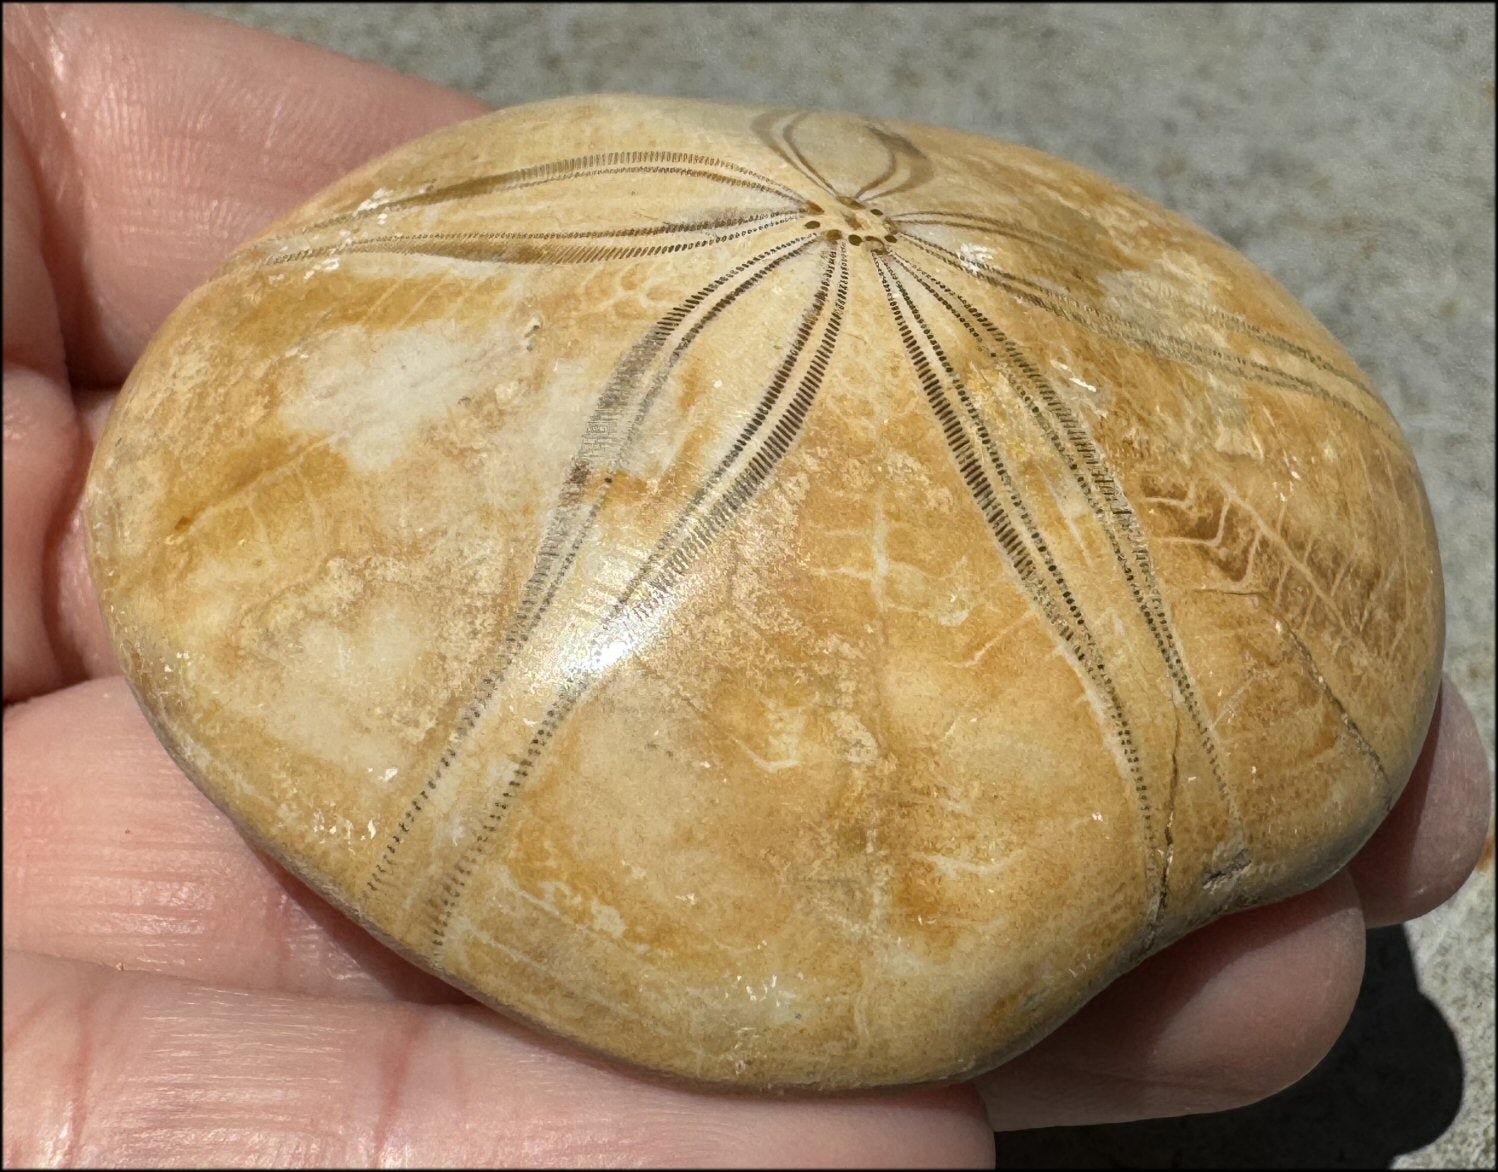 Fossil Sea Urchin Specimen / Echinoid Fossil - Let go of old patterns